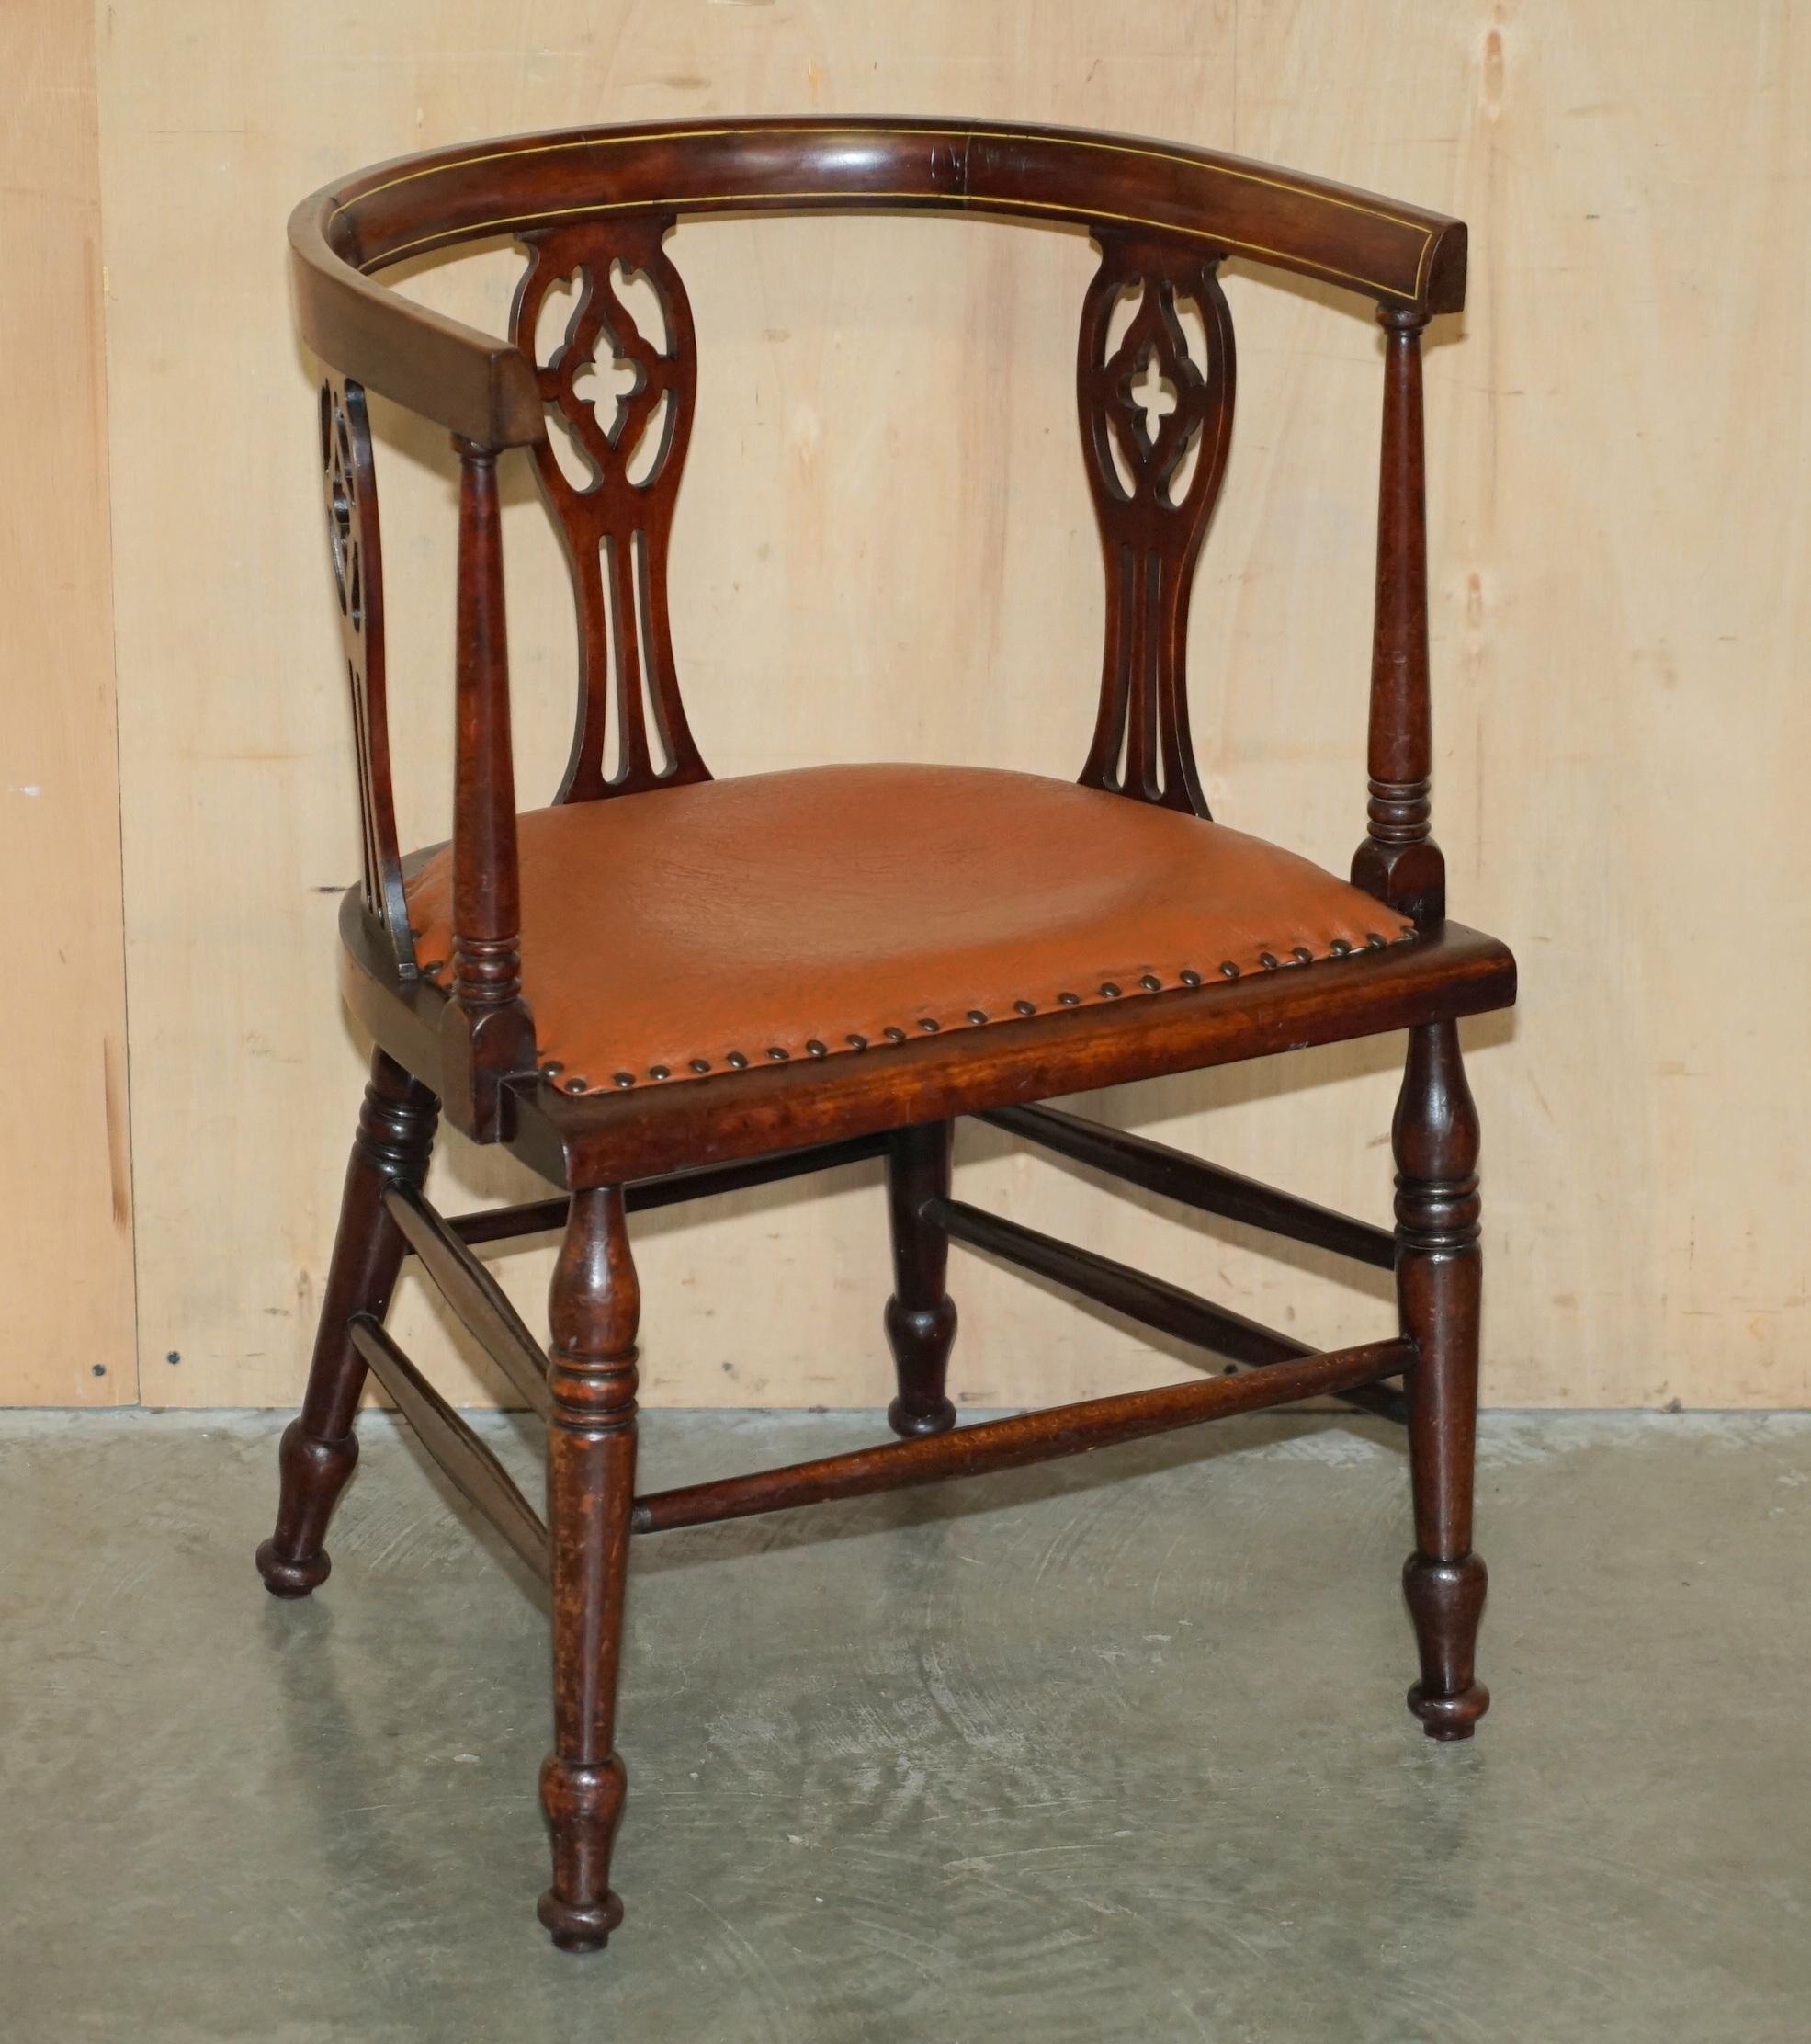 Royal House Antiques

Royal House Antiques is delighted to offer for sale this lovely pair of Edwardian circa 1900-1910 tub armchairs in Flamed Mahogany with Walnut inlaid in the Sheraton Revival taste

Please note the delivery fee listed is just a